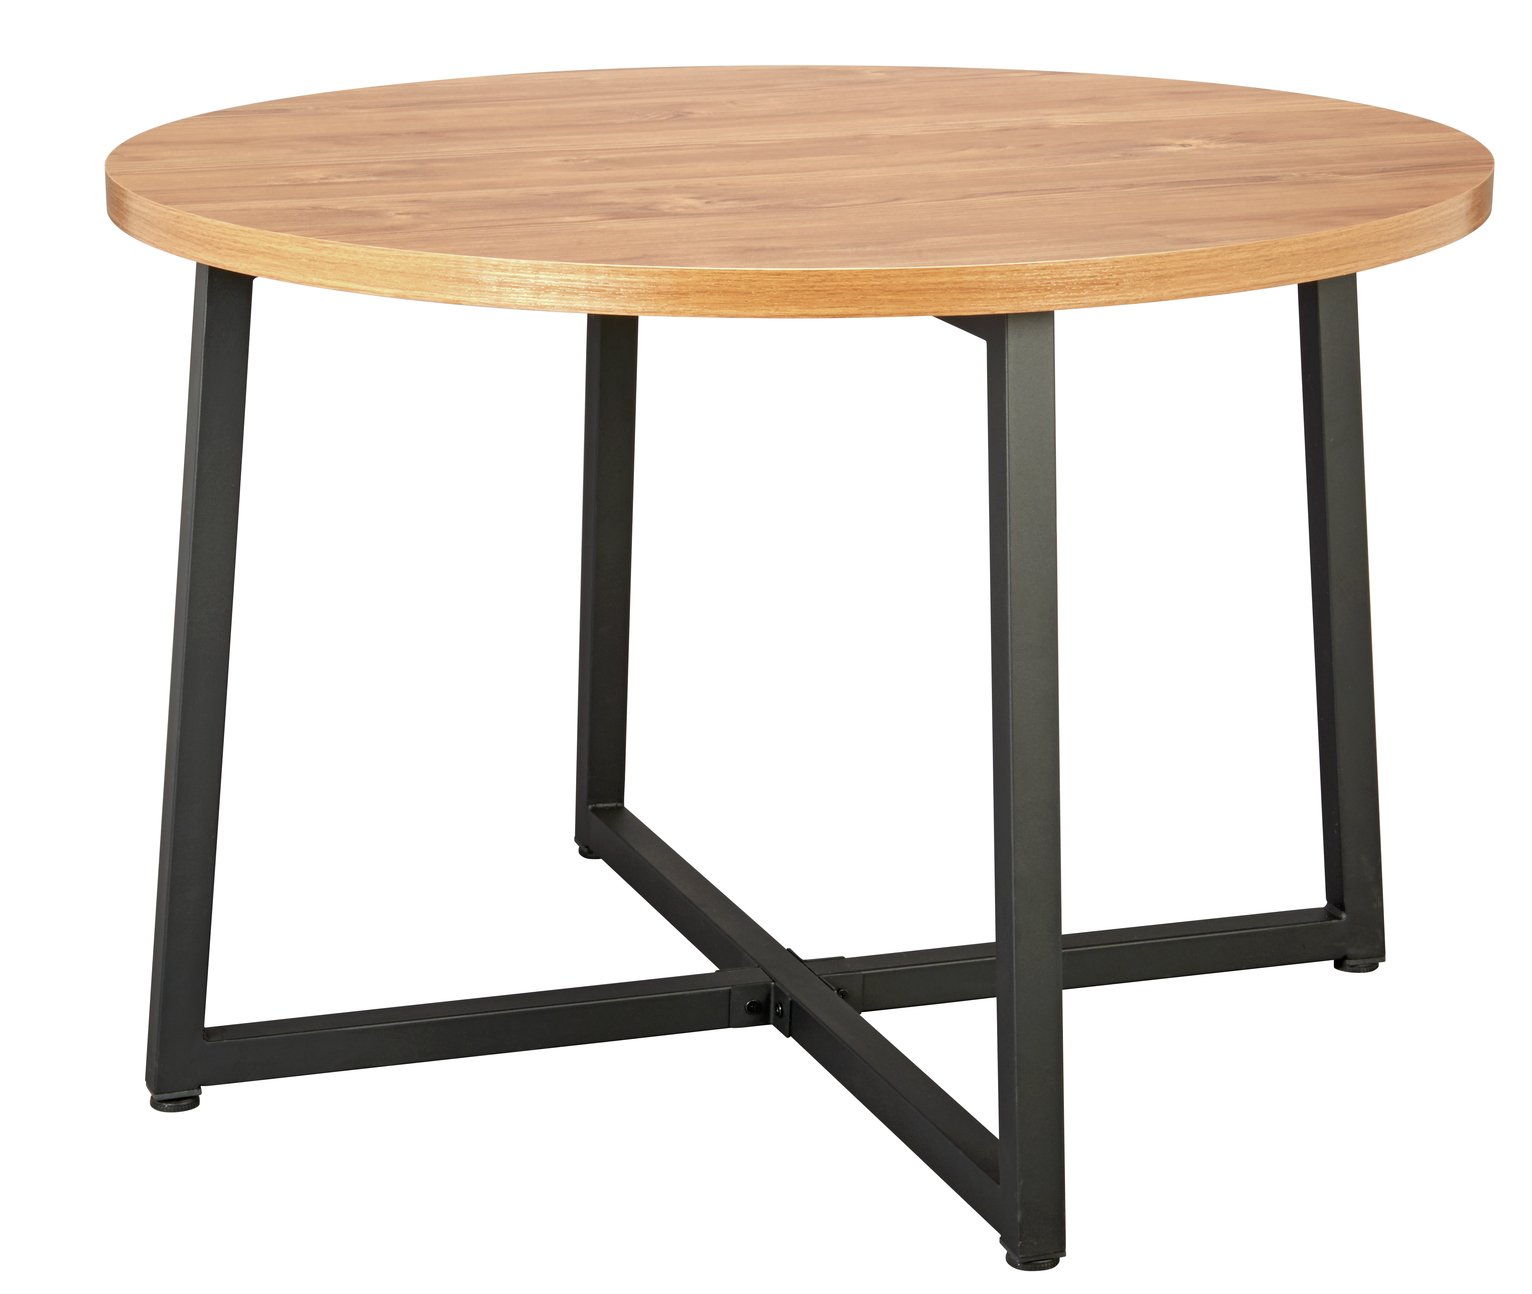 Argos Home Nomad 110cm Round Dining Table - Oak Effect